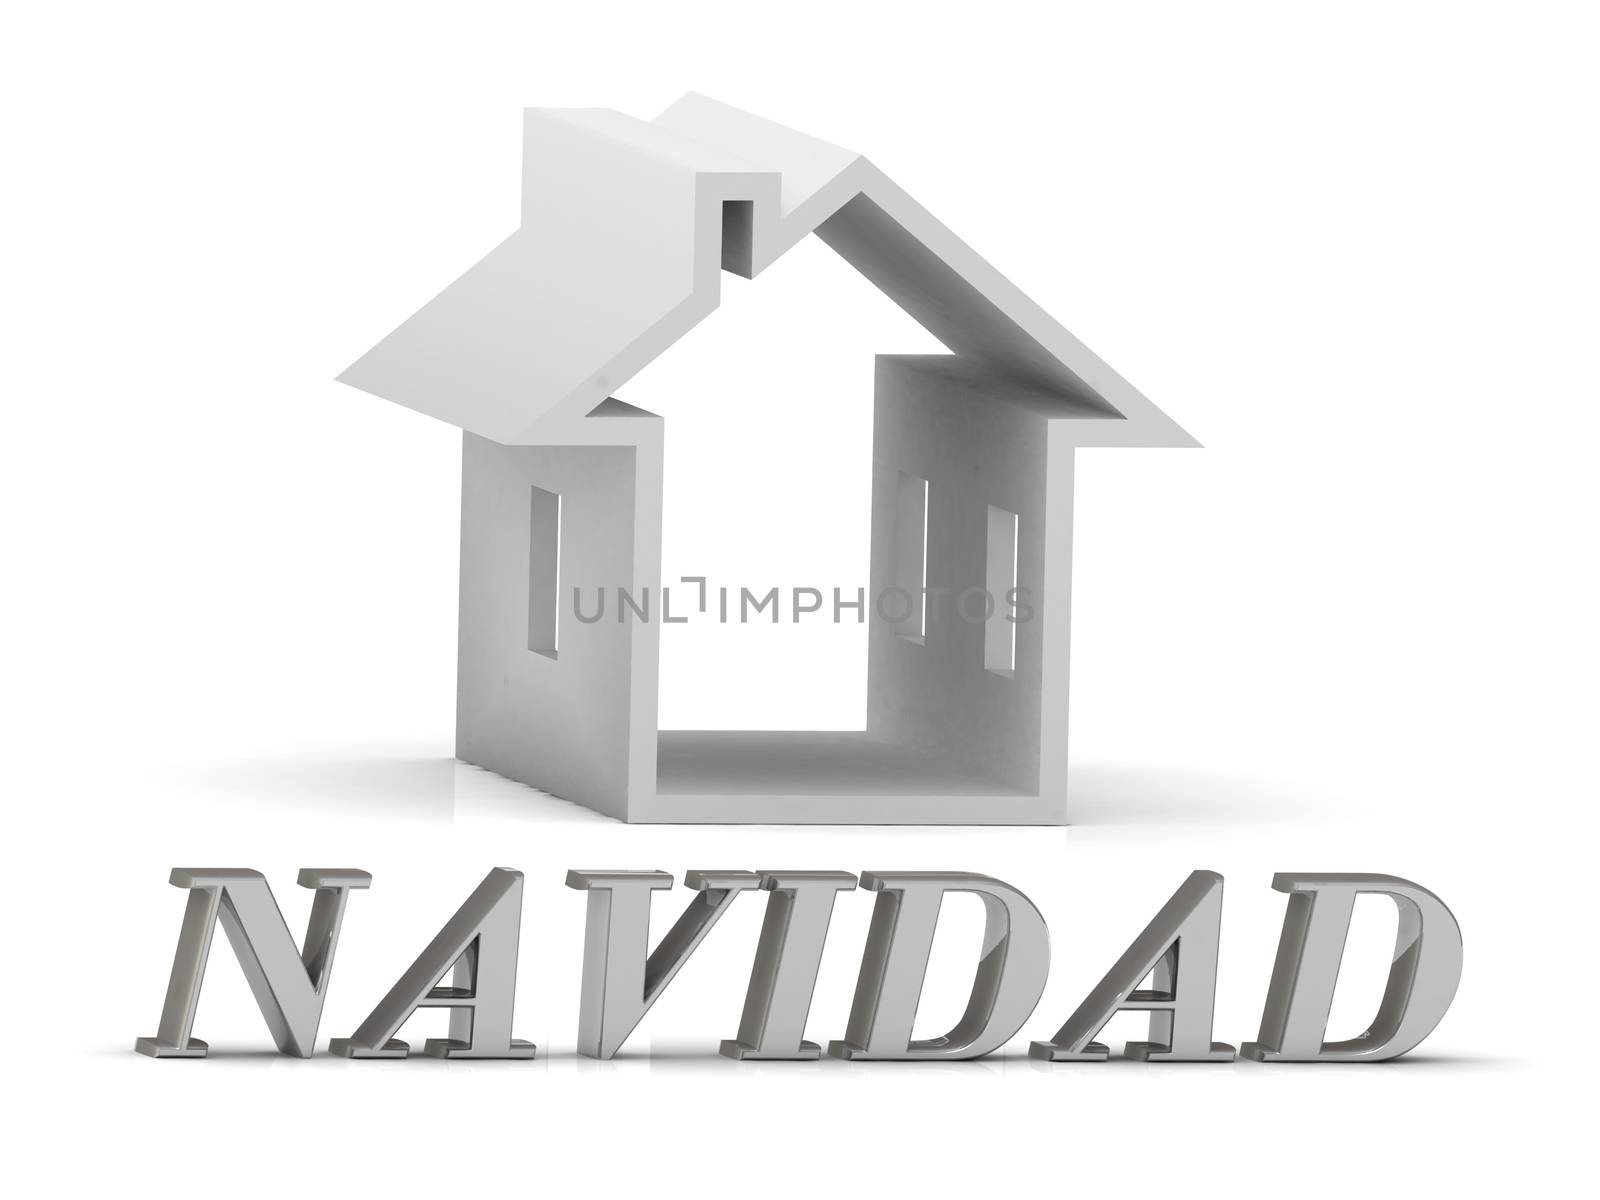 NAVIDAD- inscription of silver letters and white house by GreenMost